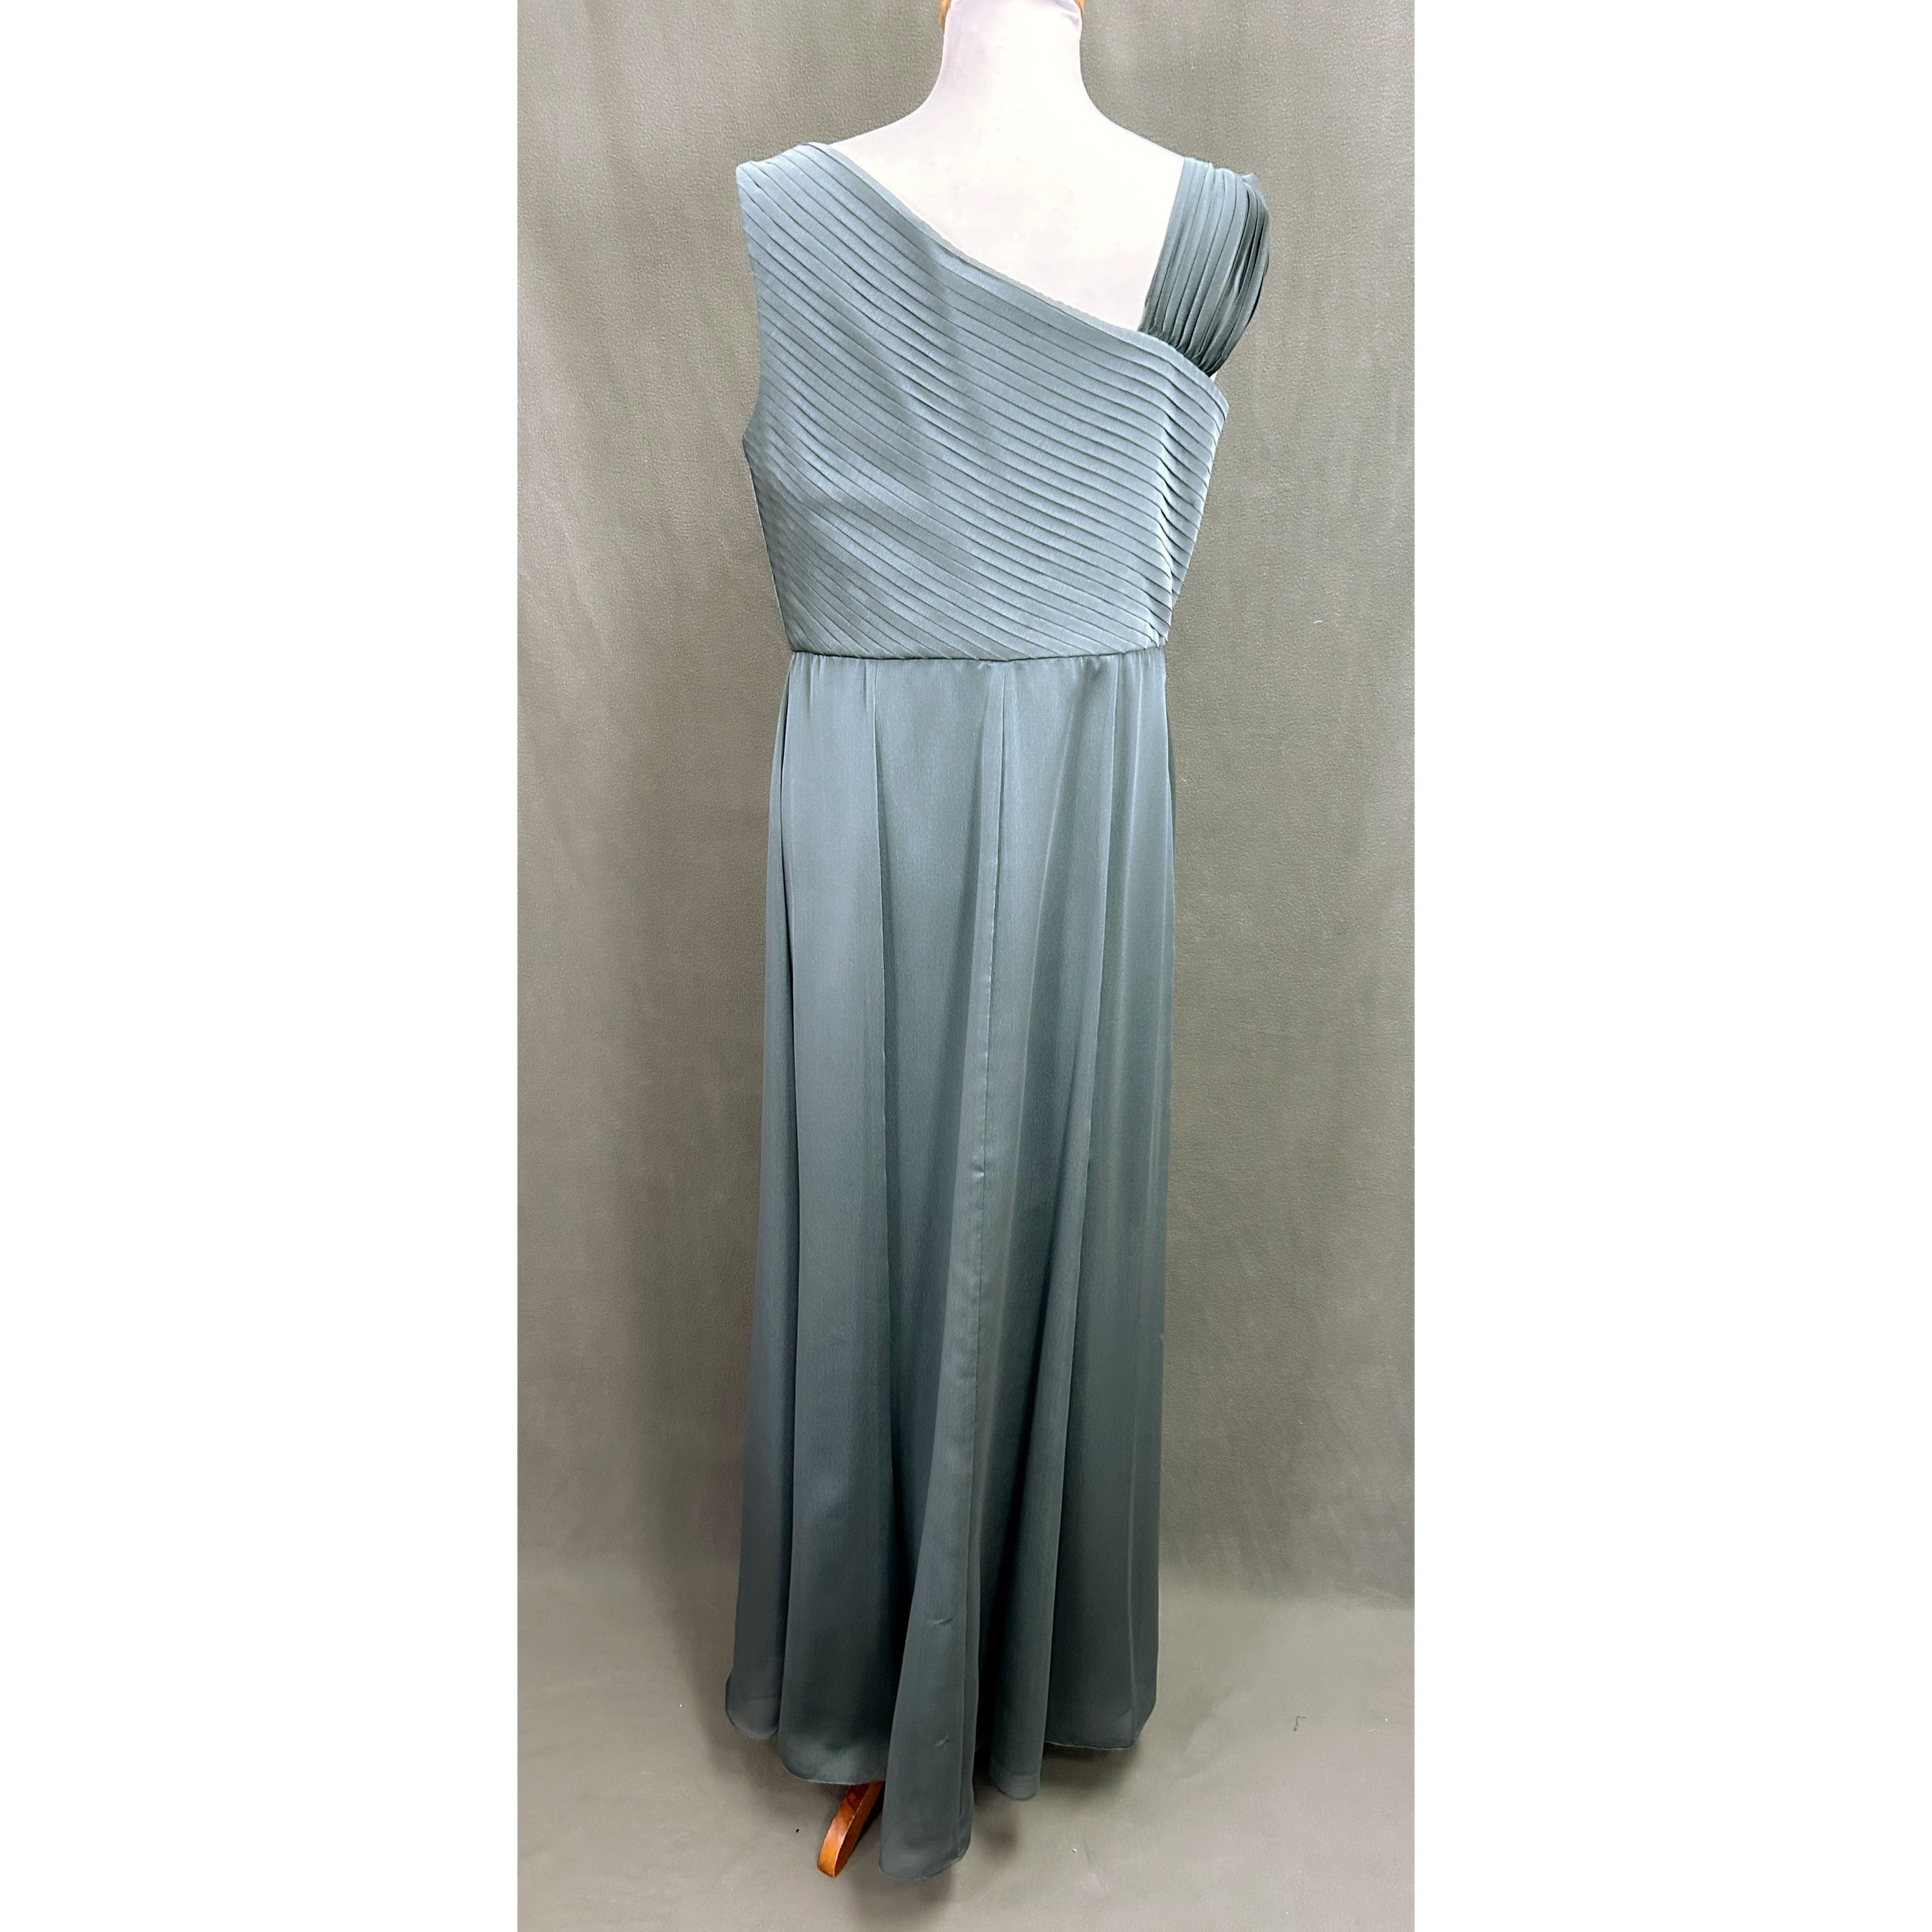 KM Collections teal dress, size 12, NEW WITH TAGS!